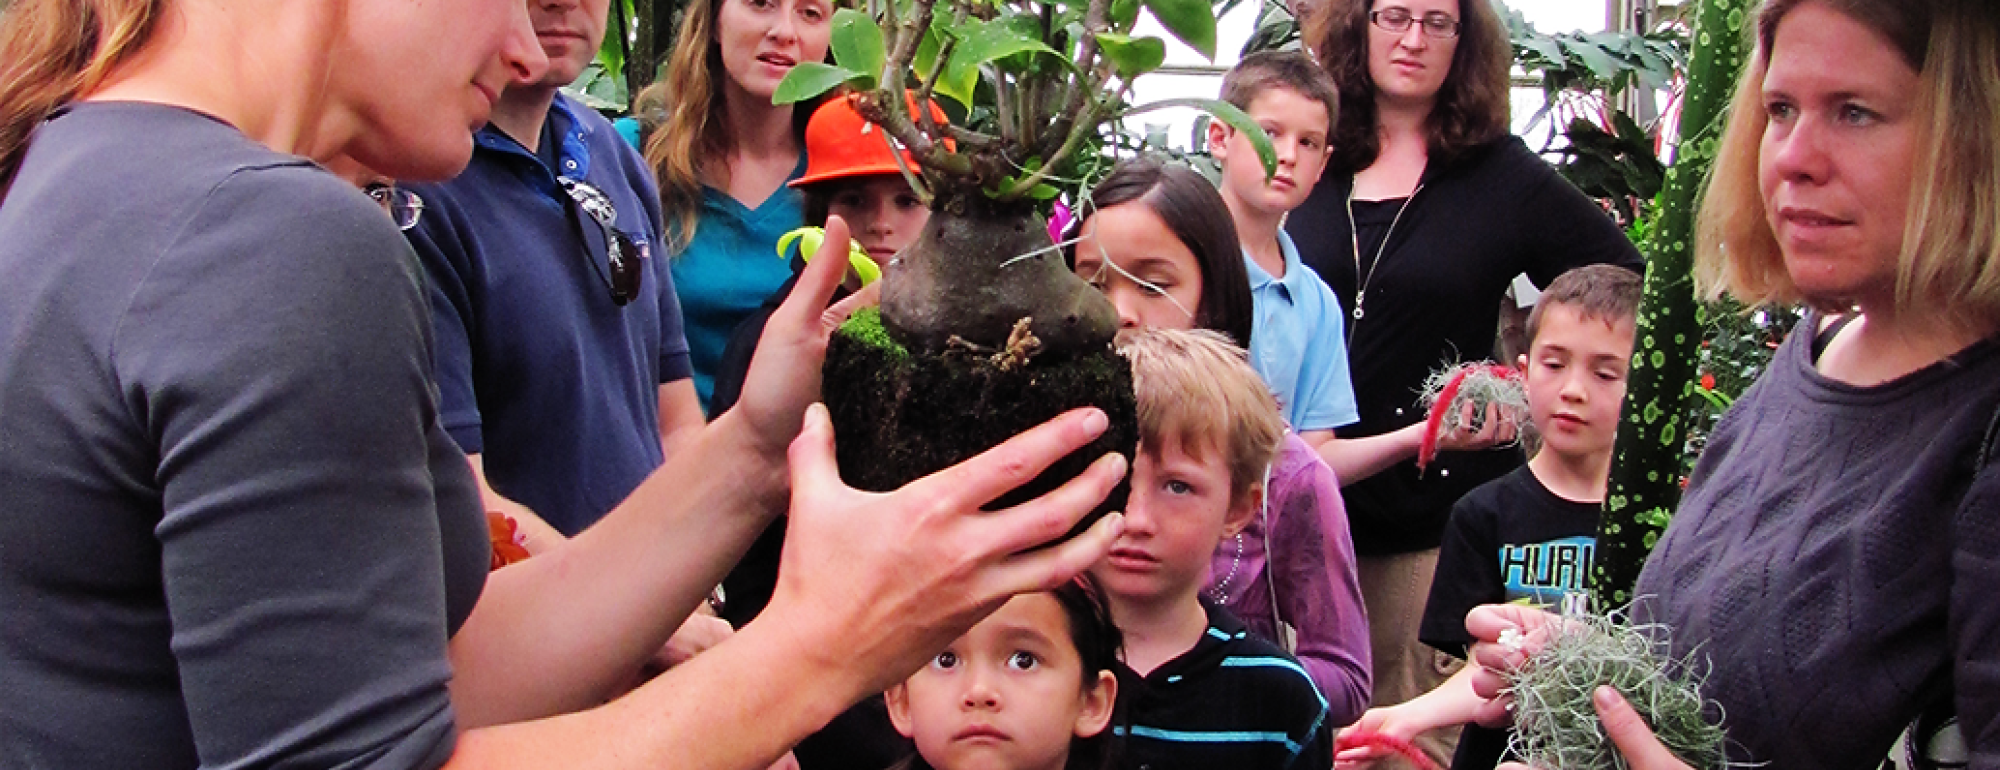 Students and children gathered around a plant in a nursery